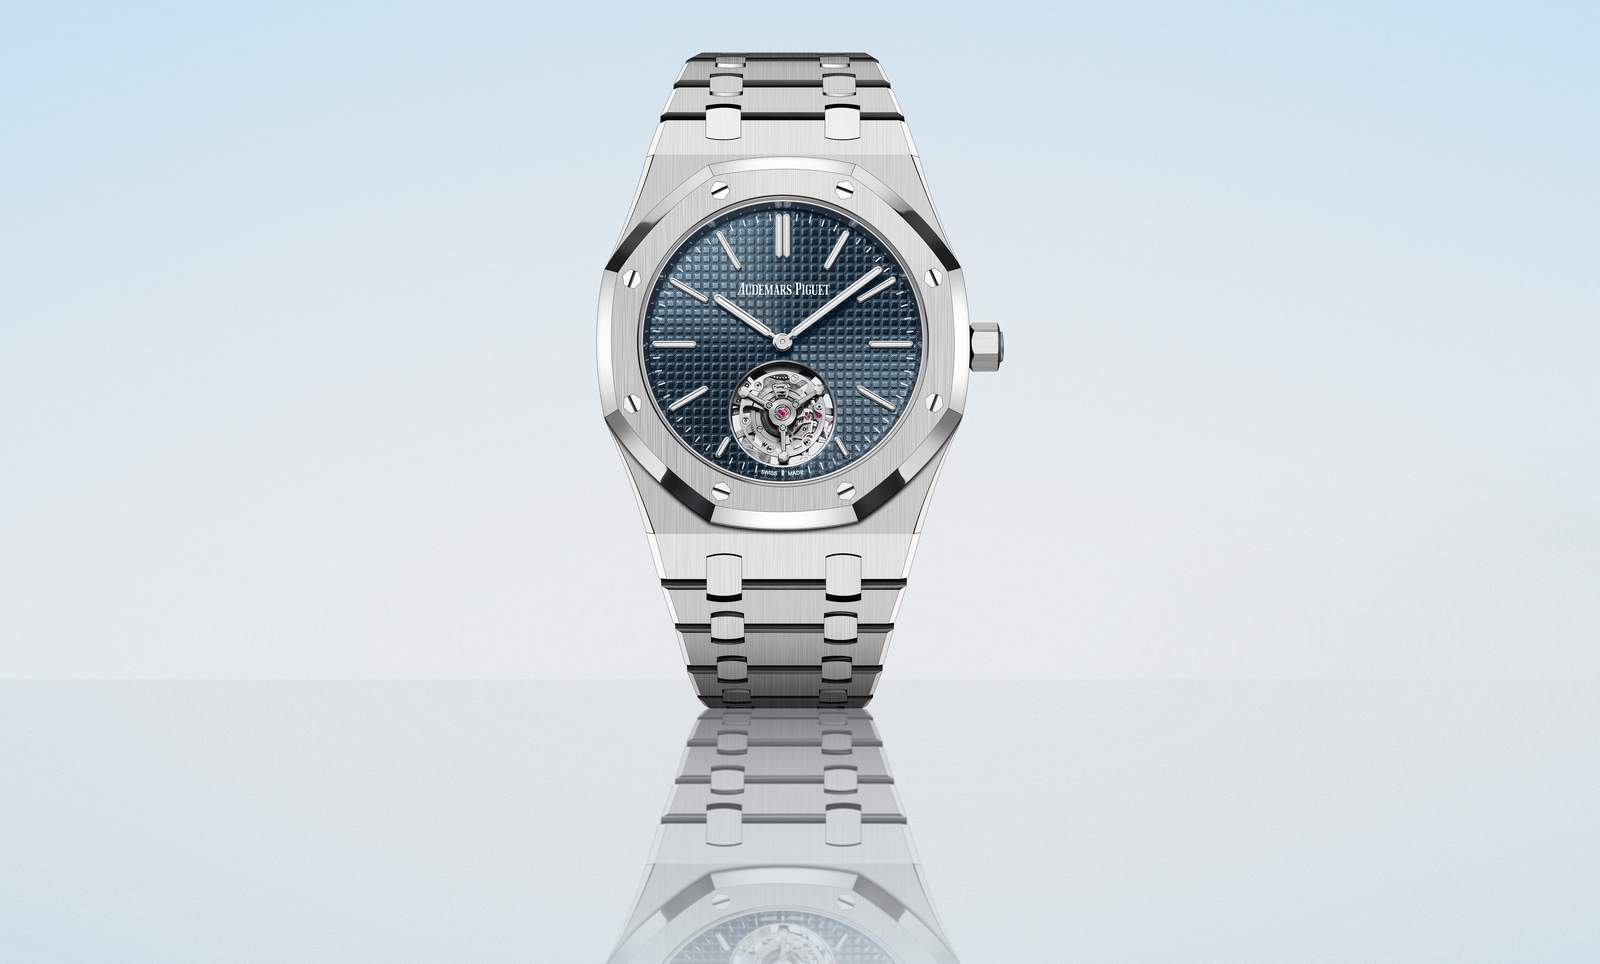 The Audemars Piguet Royal Oak RD#3 is a 50th anniversary special powered by an ultra-thin movement that has been in development for five years